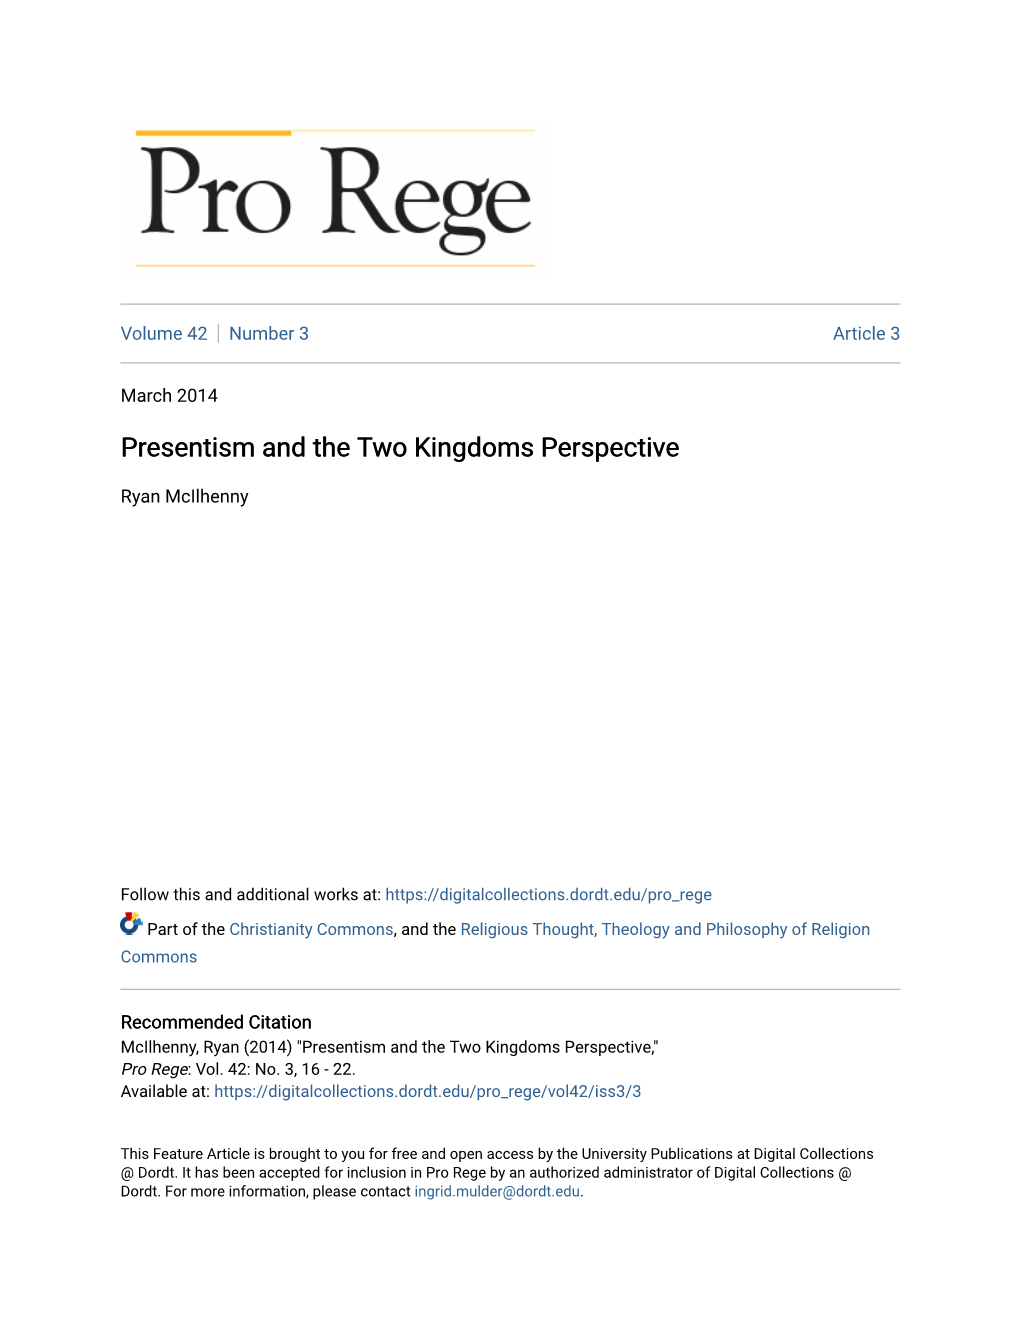 Presentism and the Two Kingdoms Perspective